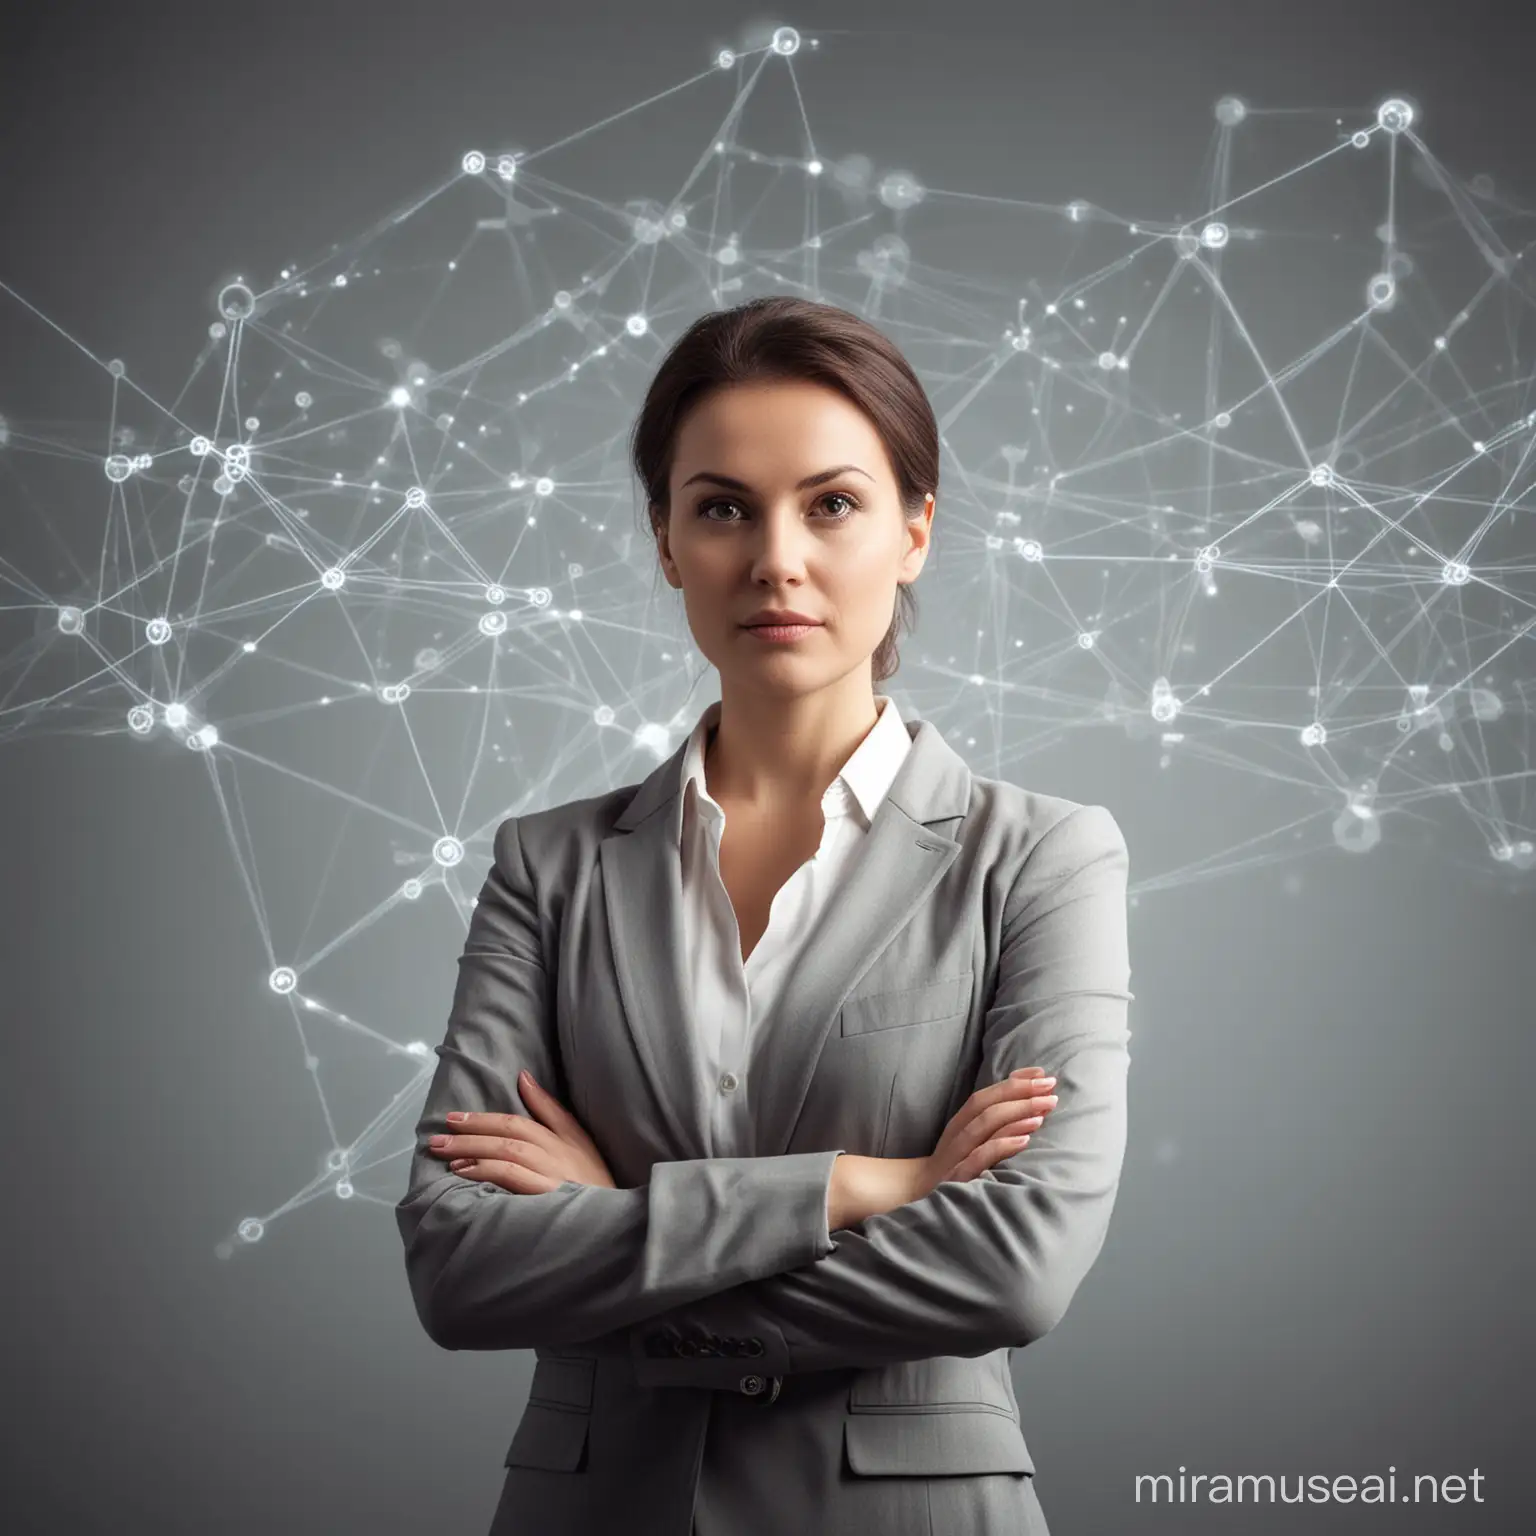 Professionally Dressed Female Board Leader with Visual Network Analysis